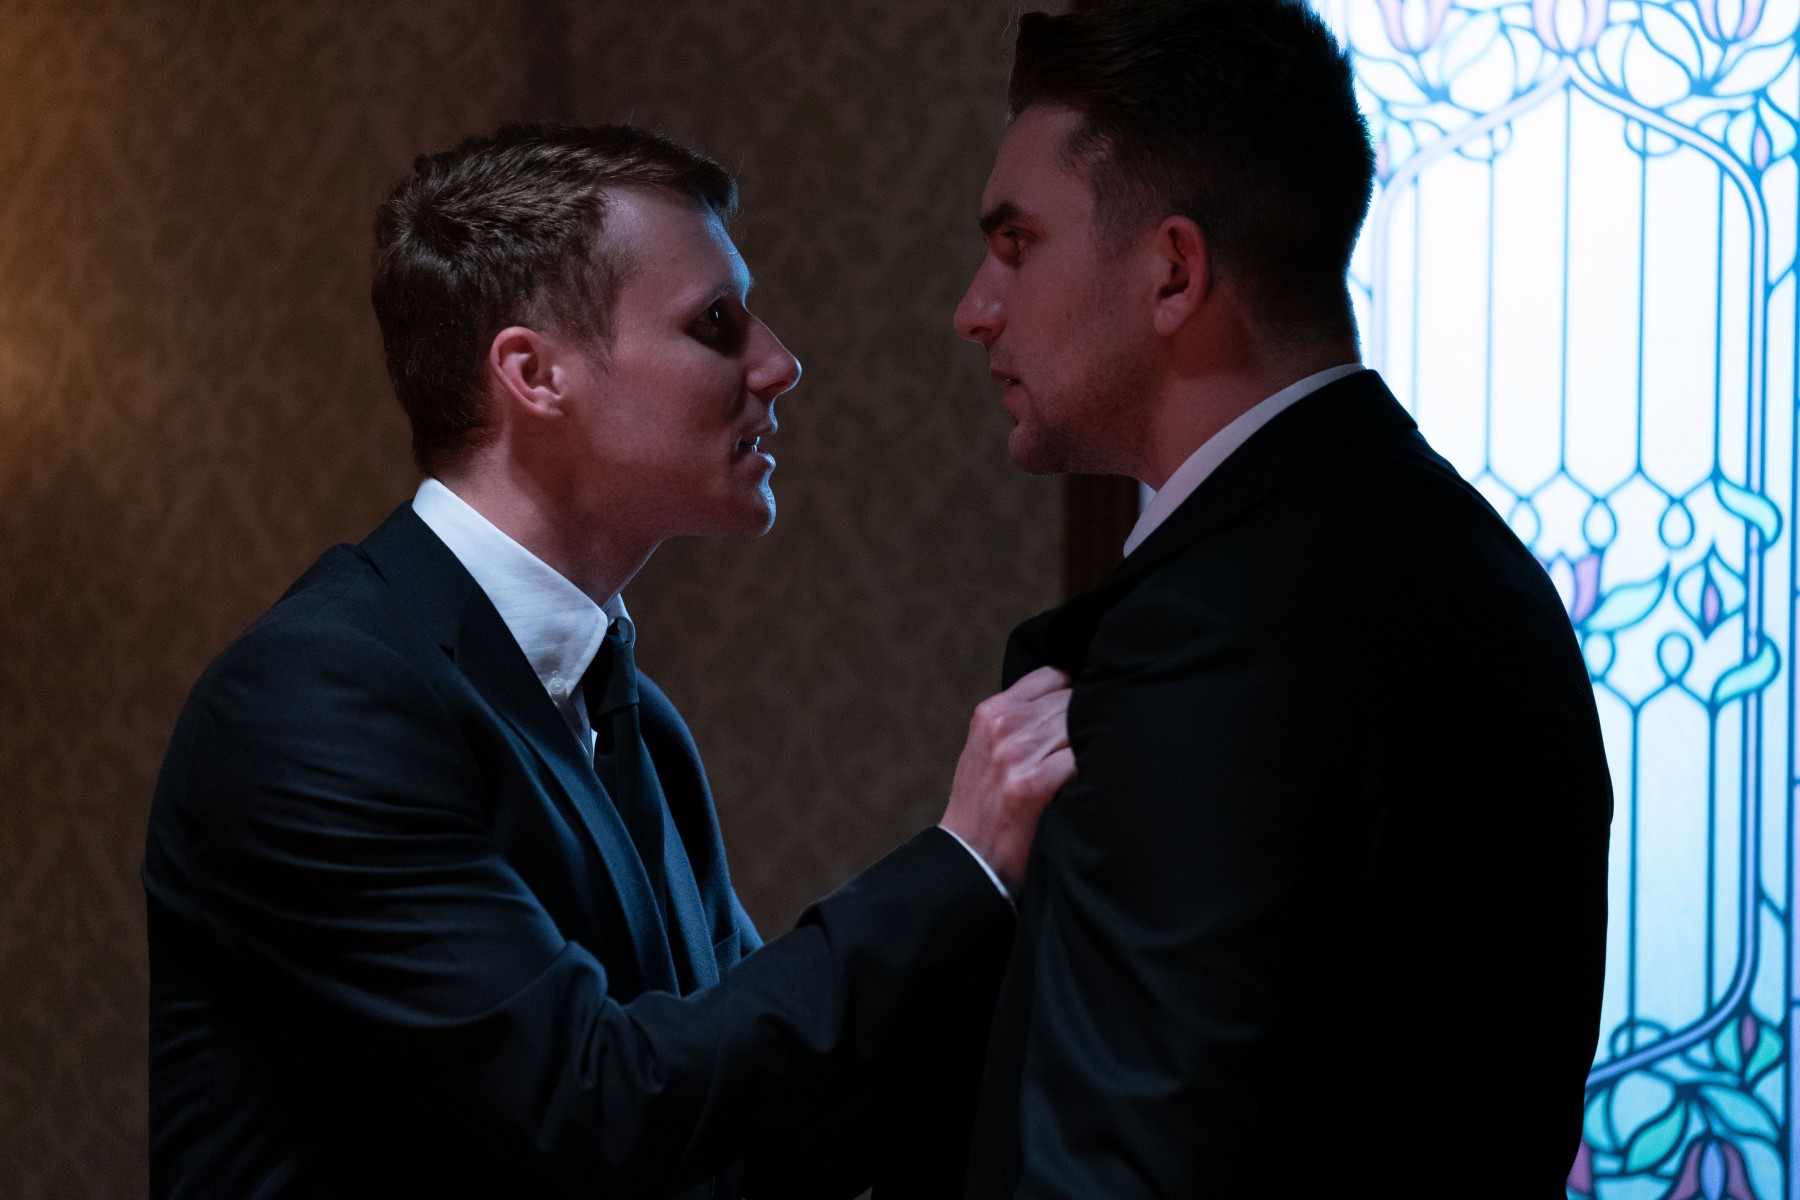 Callum is shocked by Jay's angry reaction to the funeral request